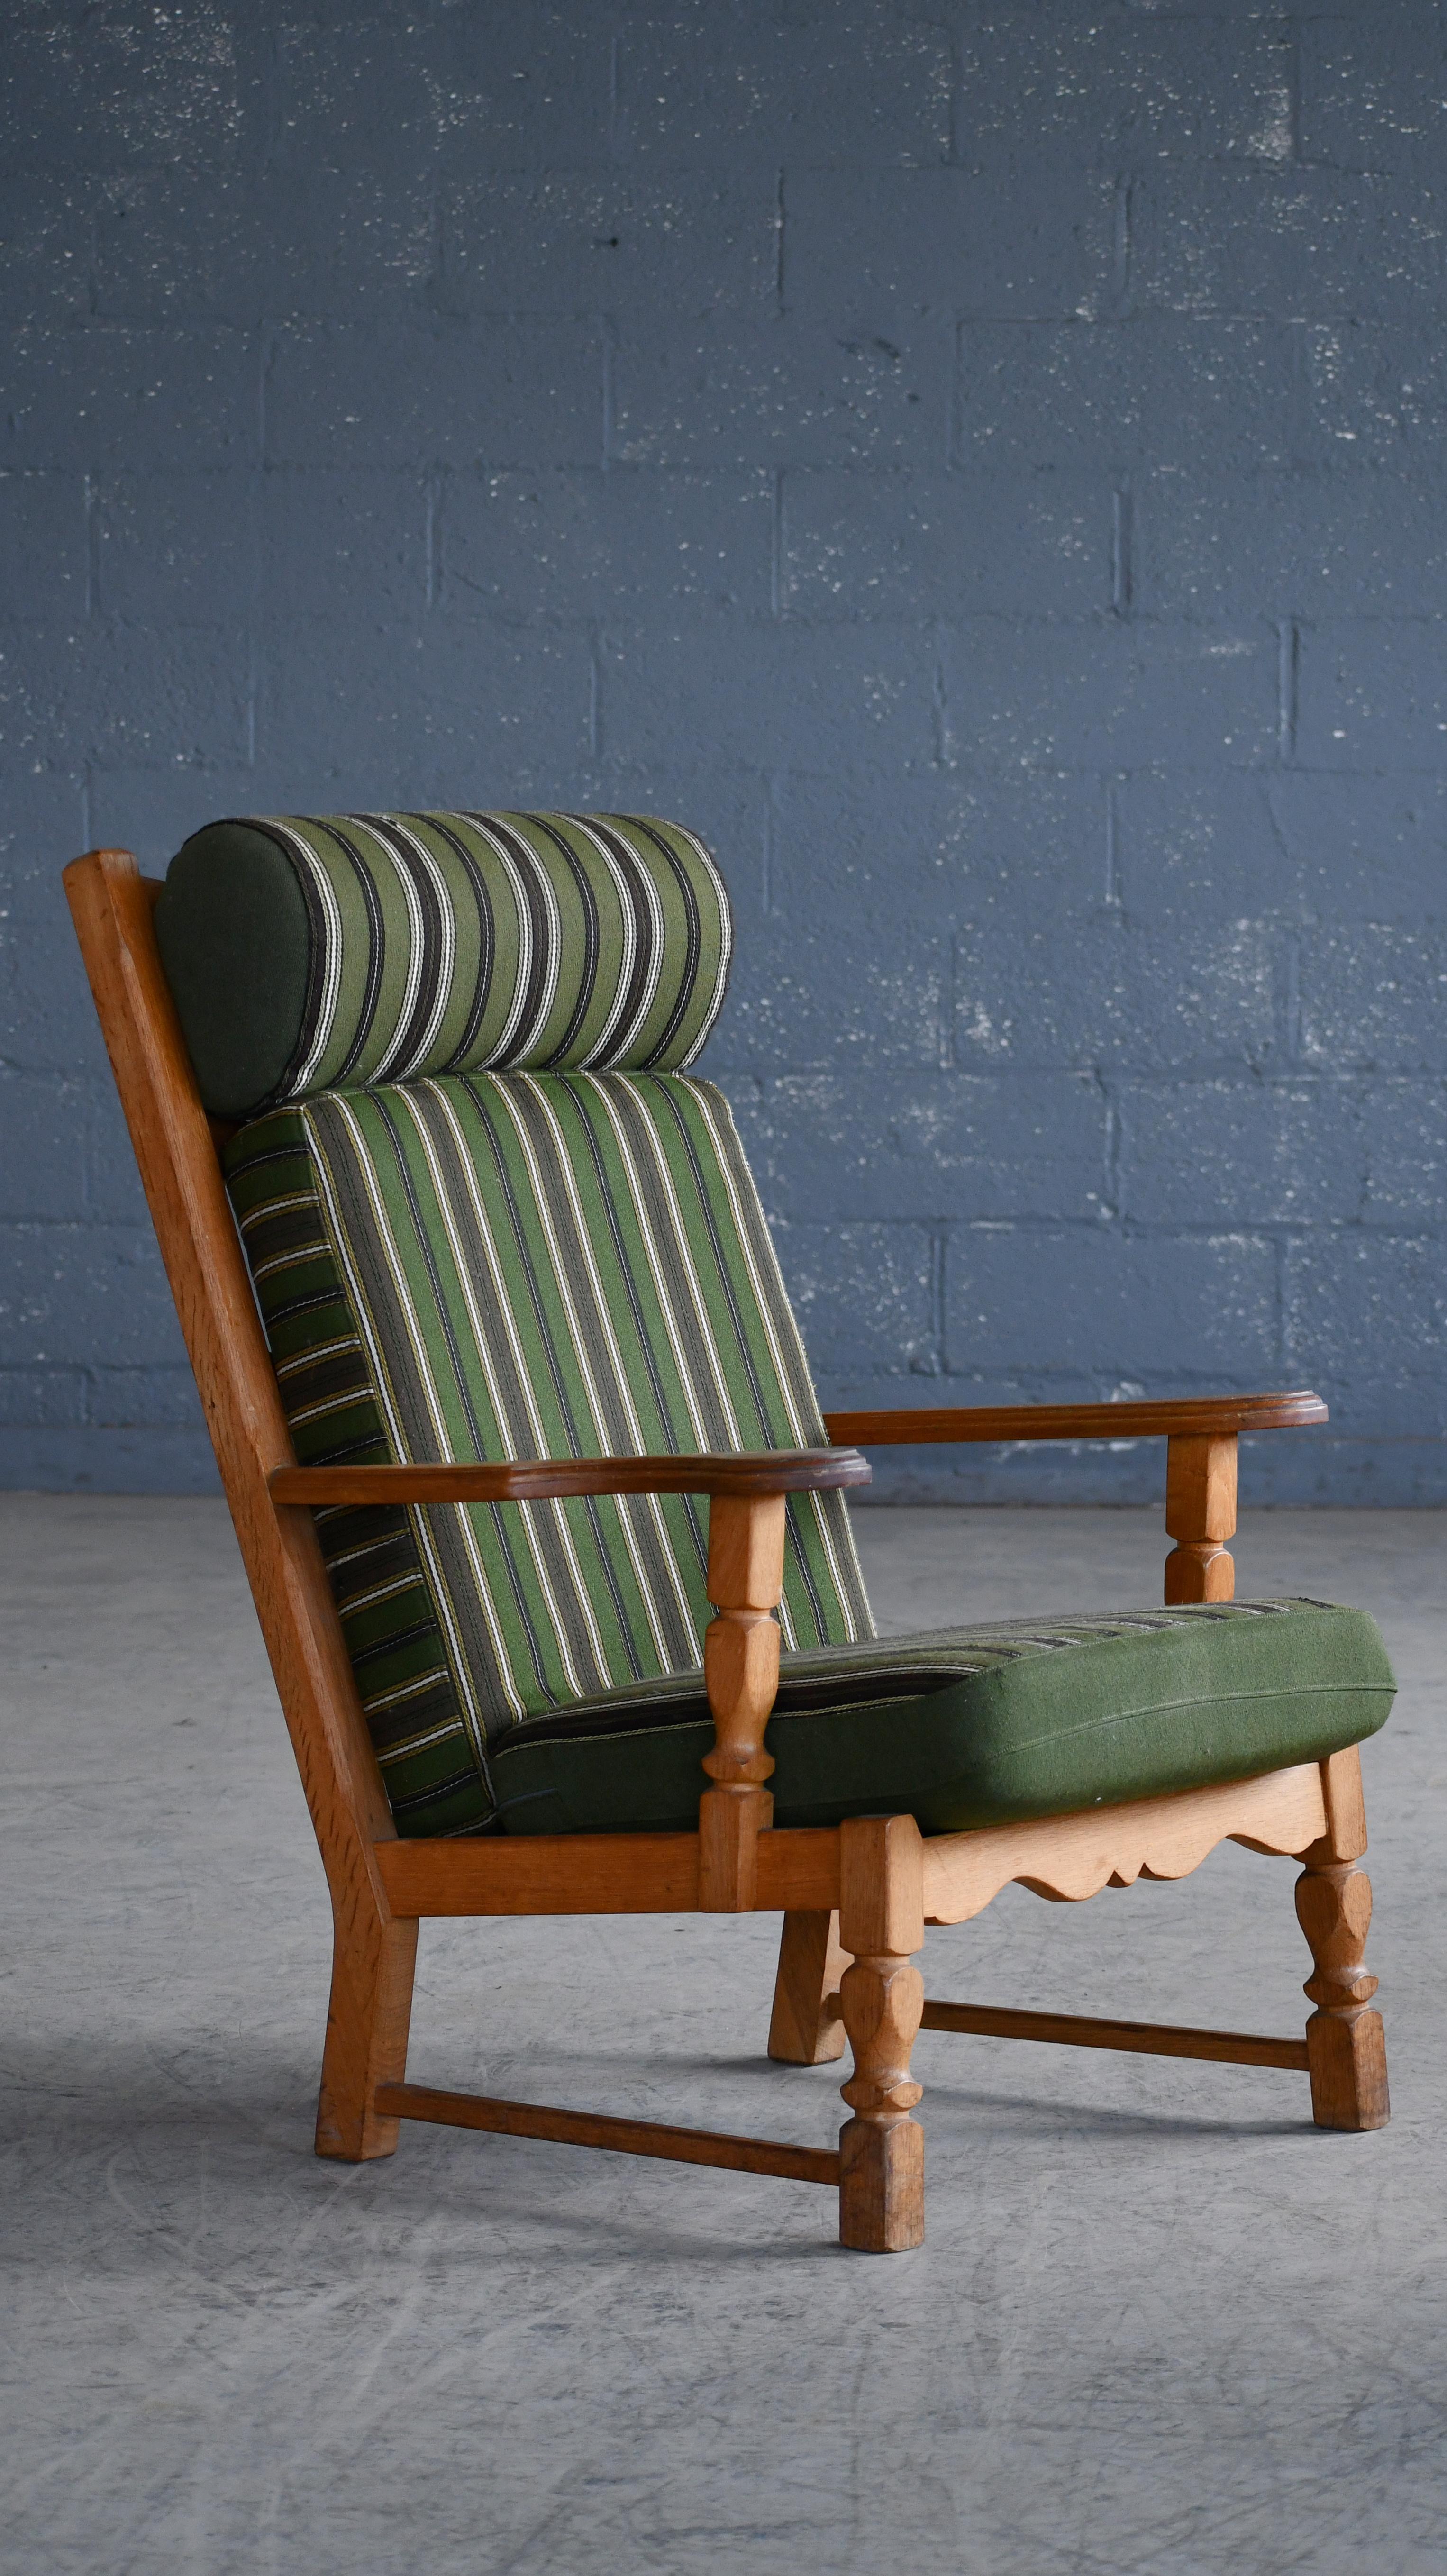 Late 20th Century Danish Mid-Century Carved Oak Lounge Chairs in Oak by Kjaernulf, 1960's For Sale